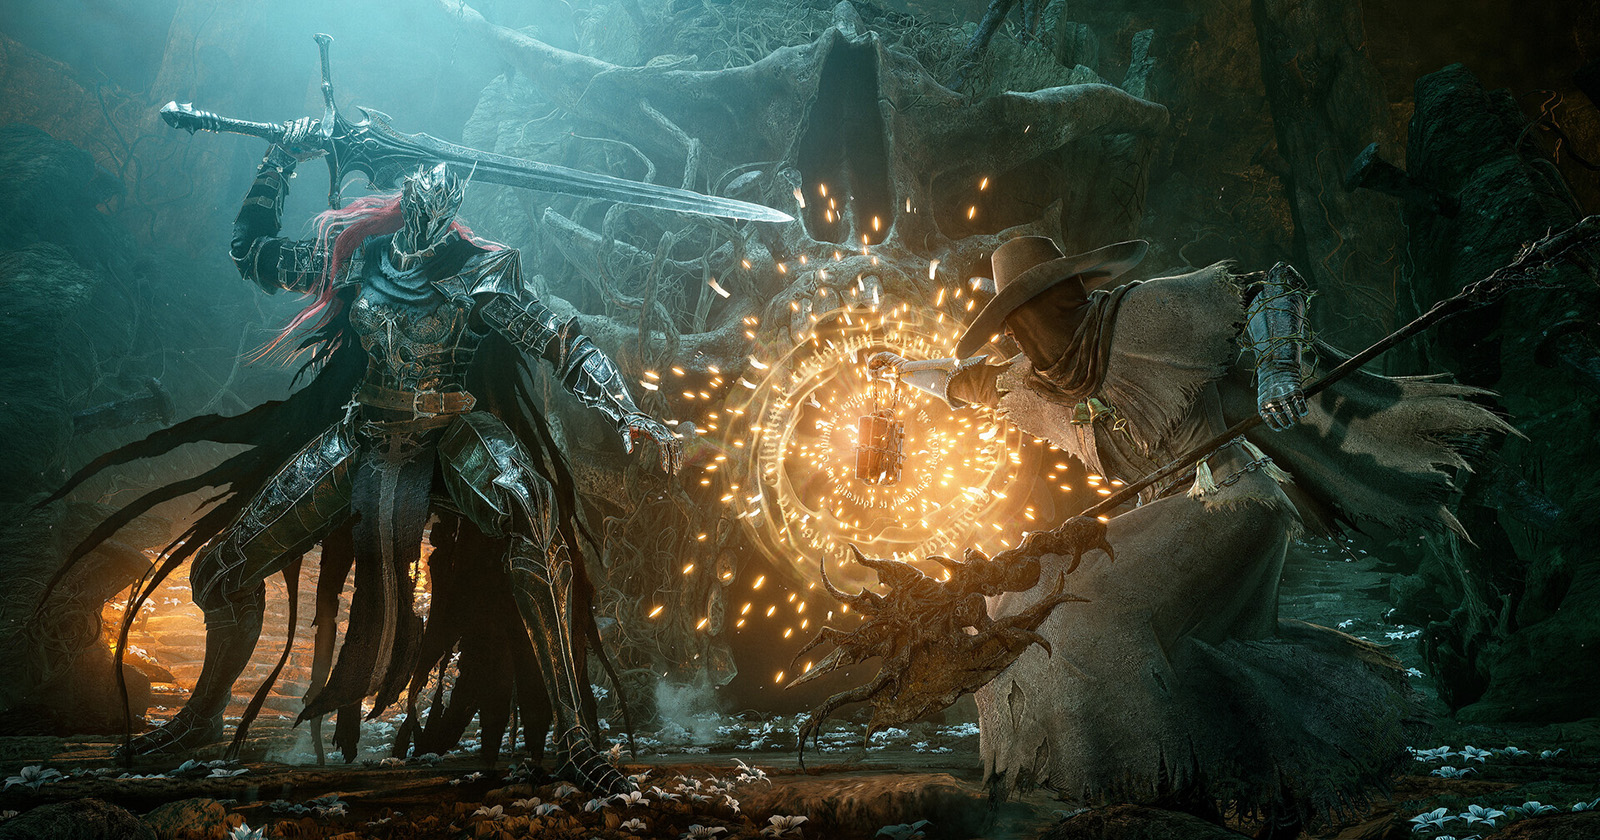 Lords of The Fallen – CI Games